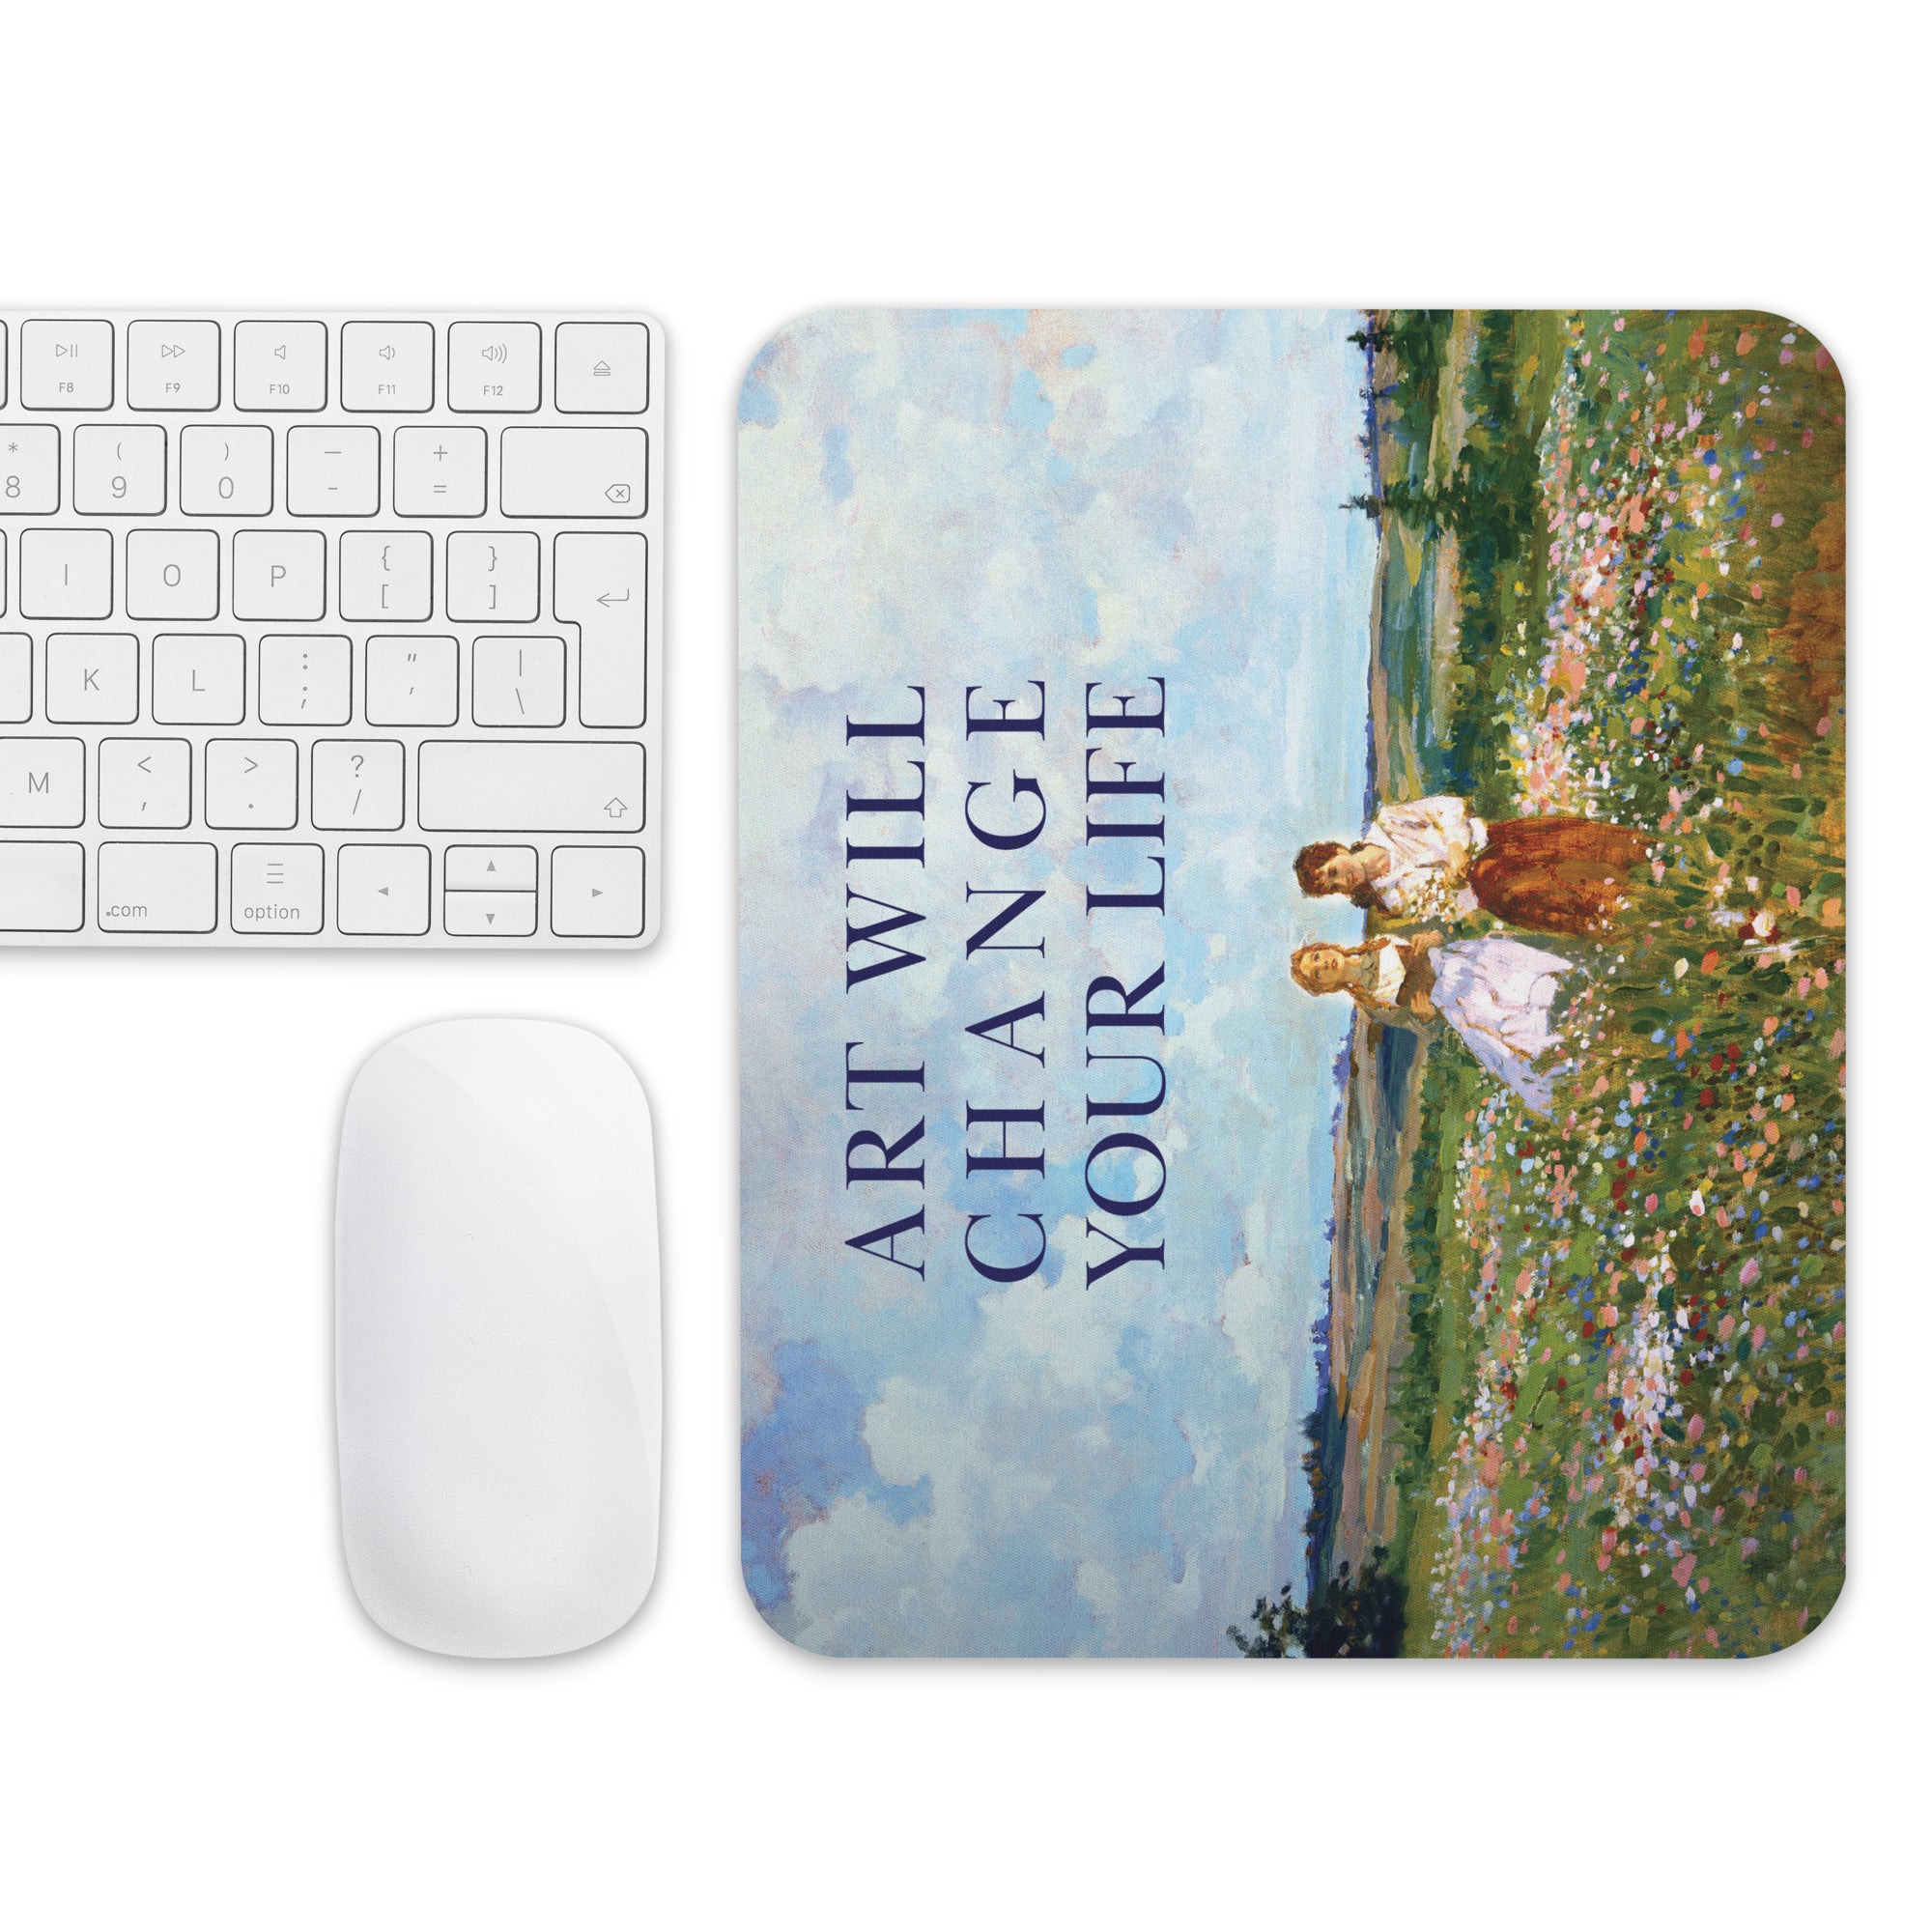 Art Will Change Your Life Mouse Pad